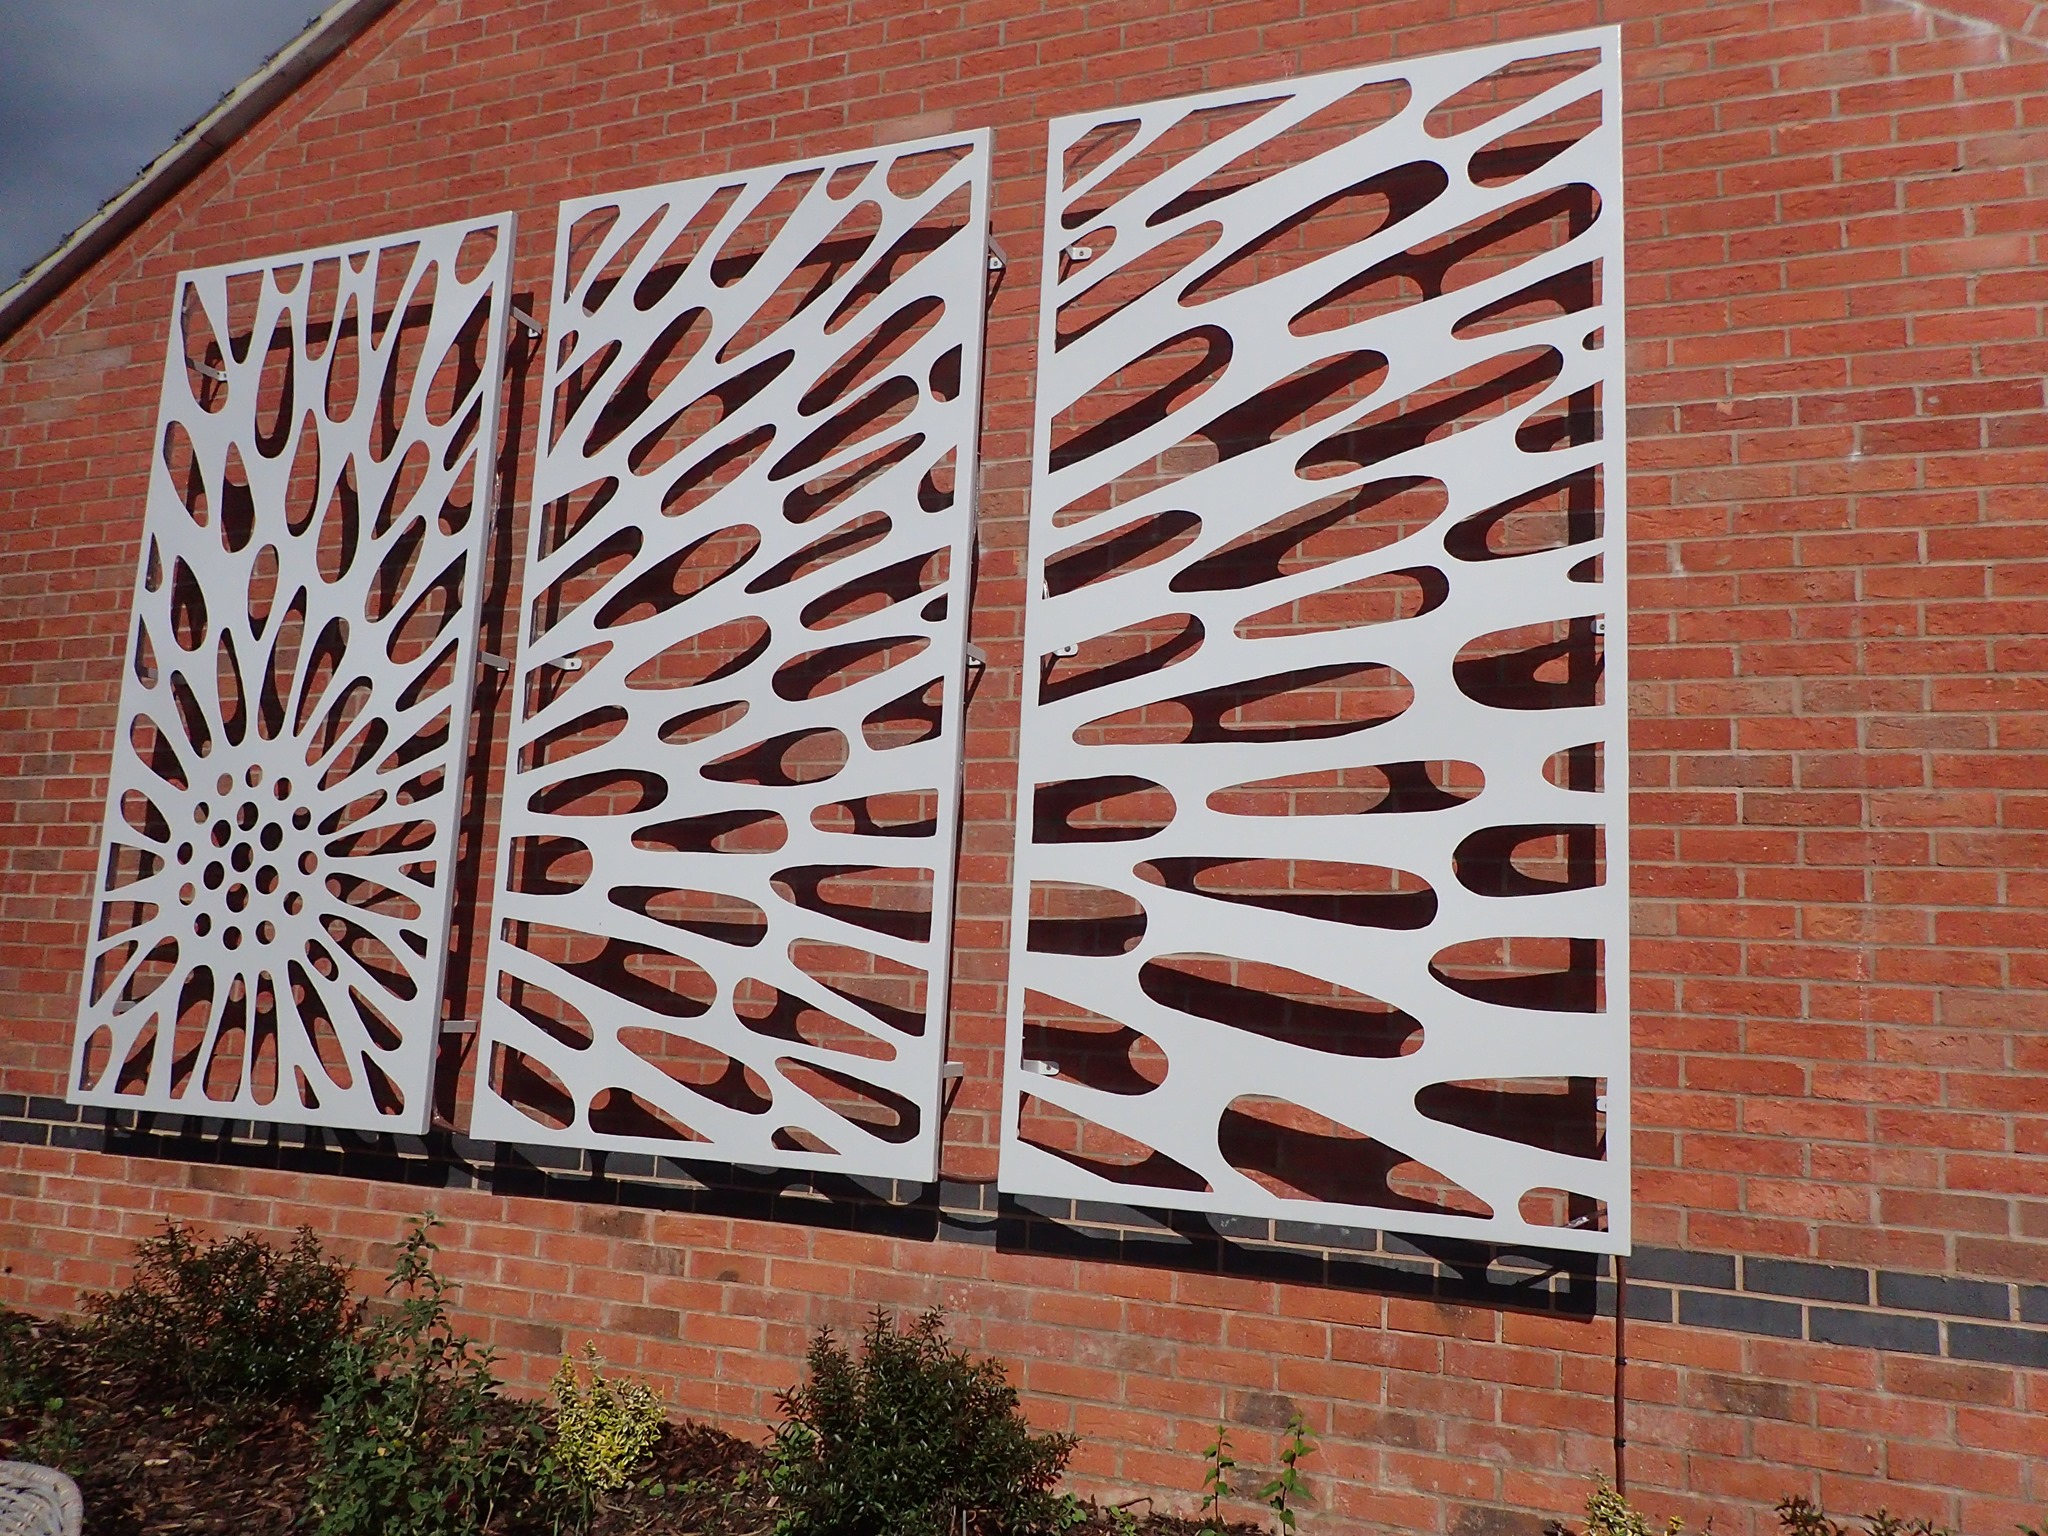 Metal powder-coated sculpture attached to a wall.